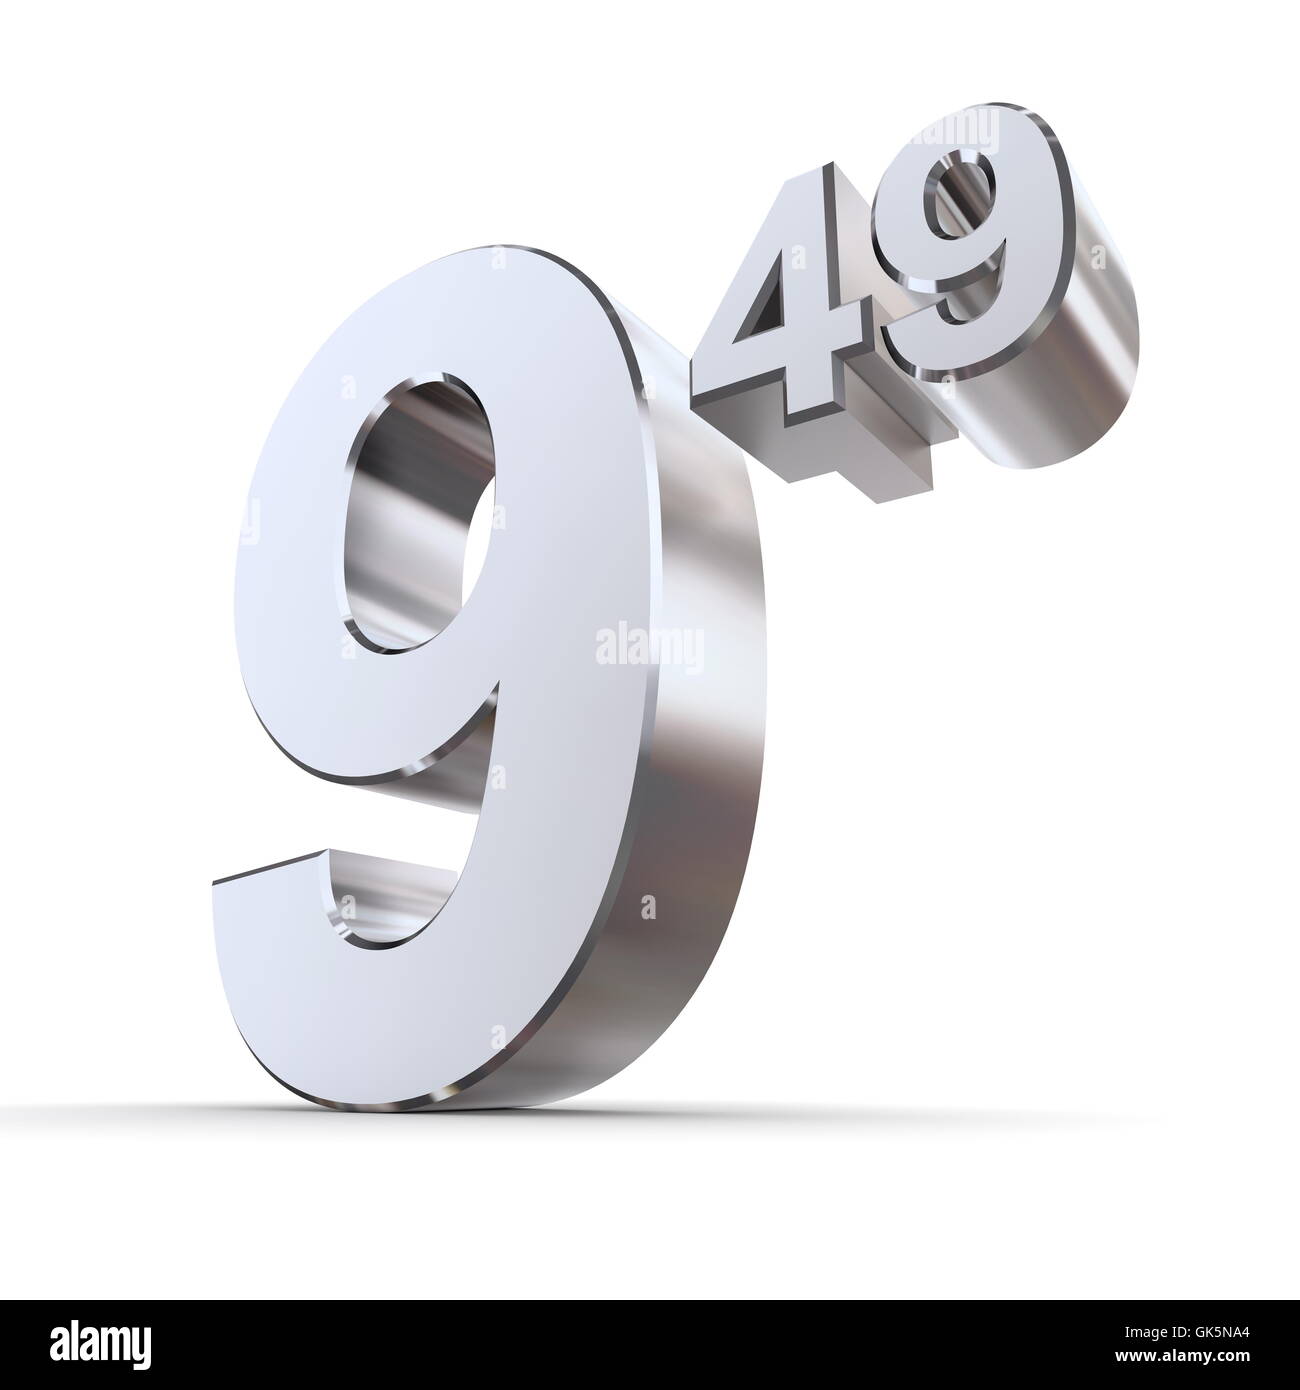 Solid Price Tag Number 9.49 - Shiny Silver-Chrome Stock Photo